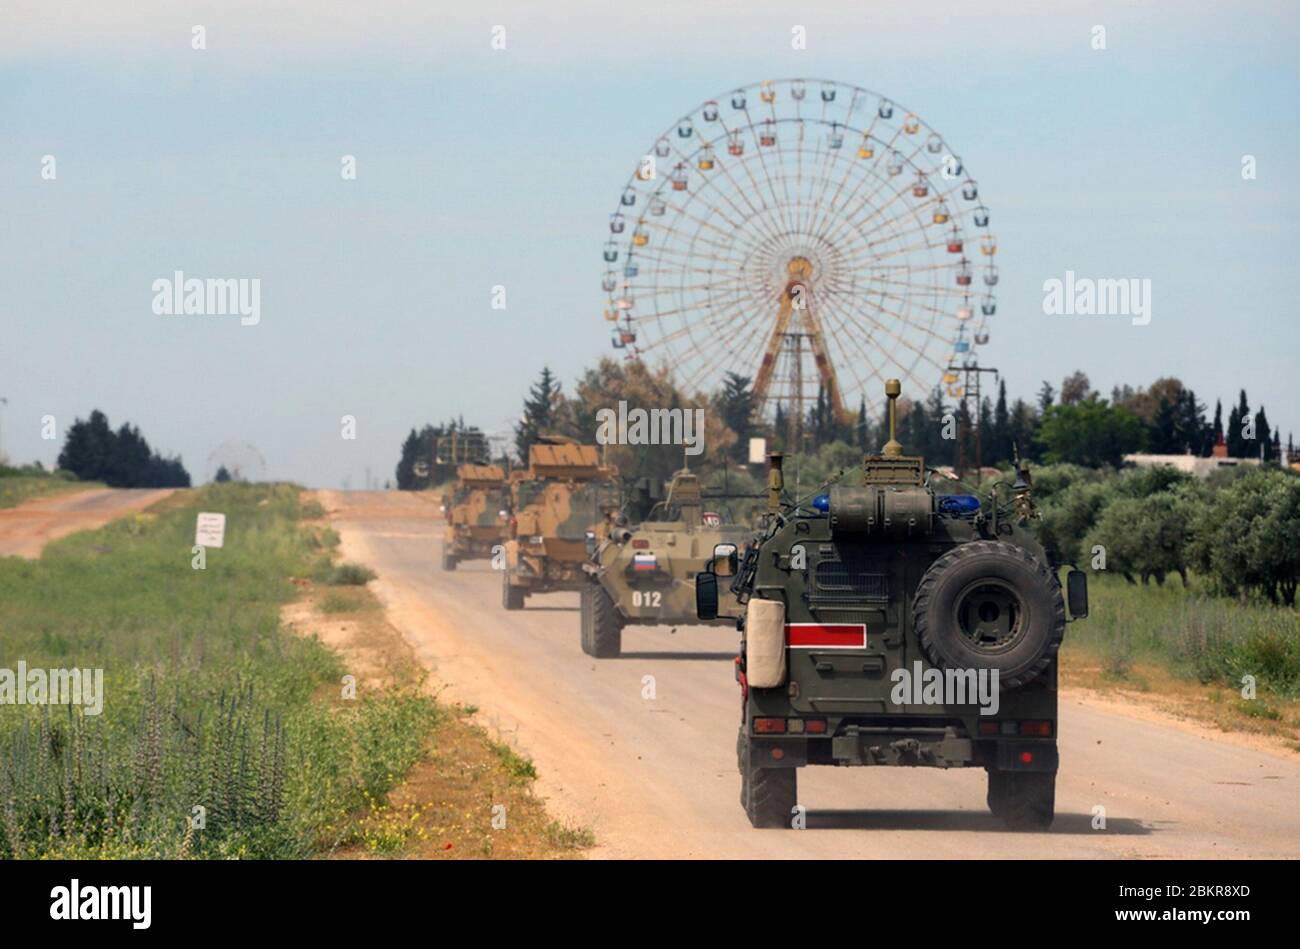 Idlib. 5th May, 2020. Turkish and Russian forces carry out their joint patrol in Idlib, Syria, May 5, 2020. Turkish and Russian forces on Tuesday carried out their eighth joint patrol in the northwestern Syrian province of Idlib, the Turkish defense ministry said. Credit: Xinhua/Alamy Live News Stock Photo